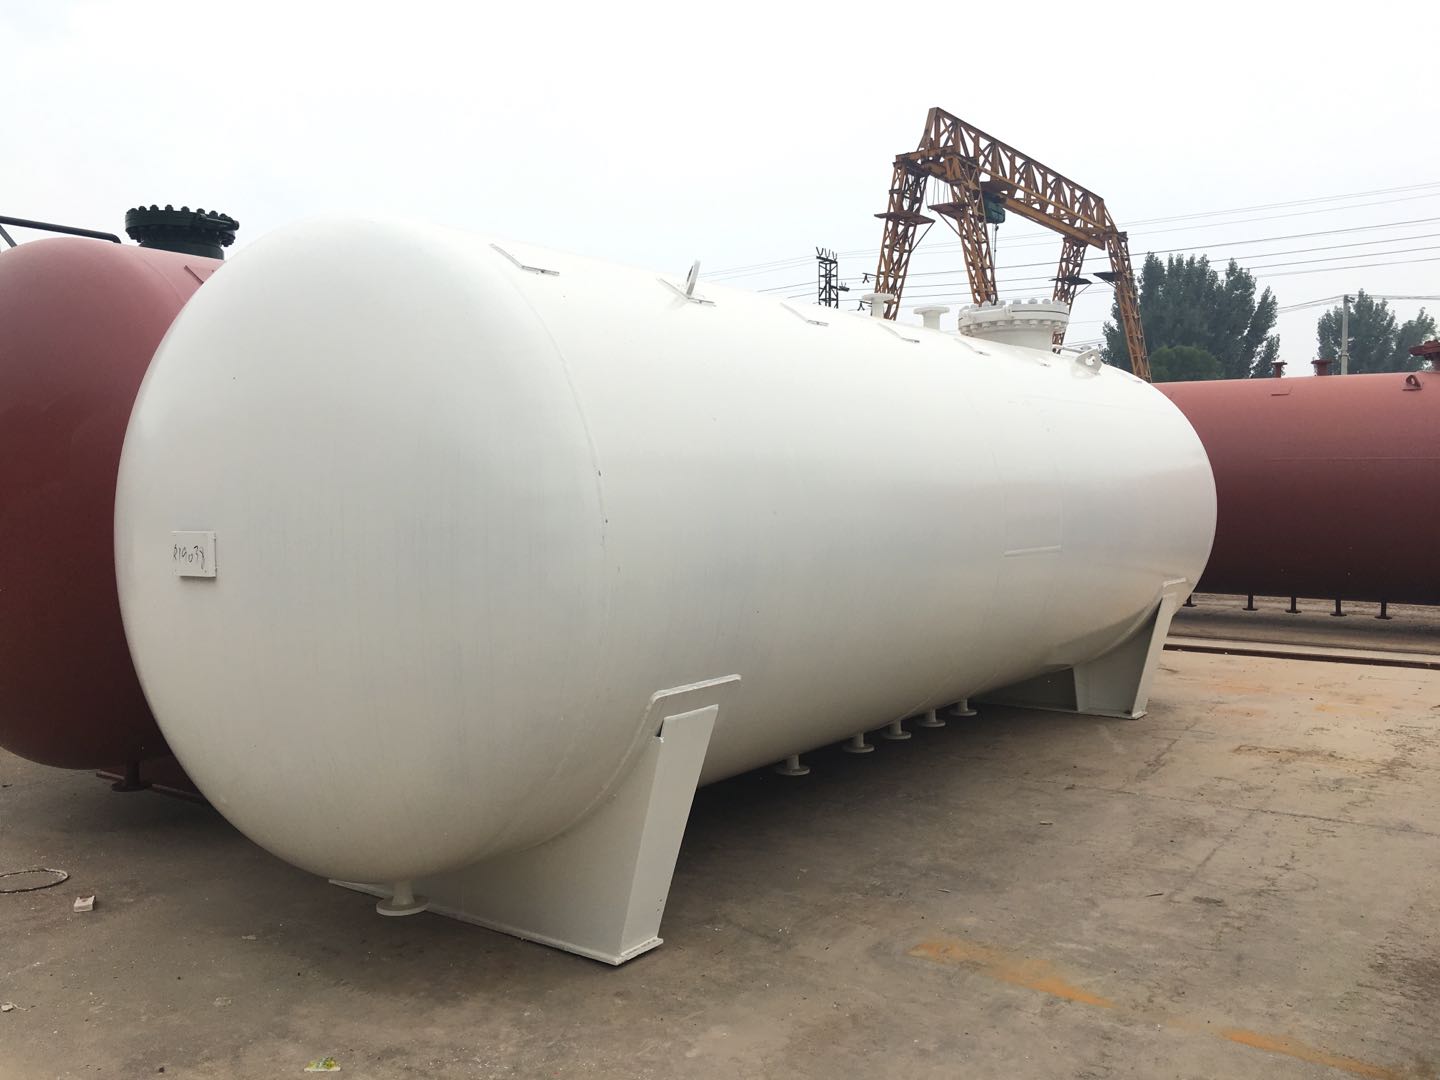 Strict control in the process of storing liquefied petroleum gas into the plant